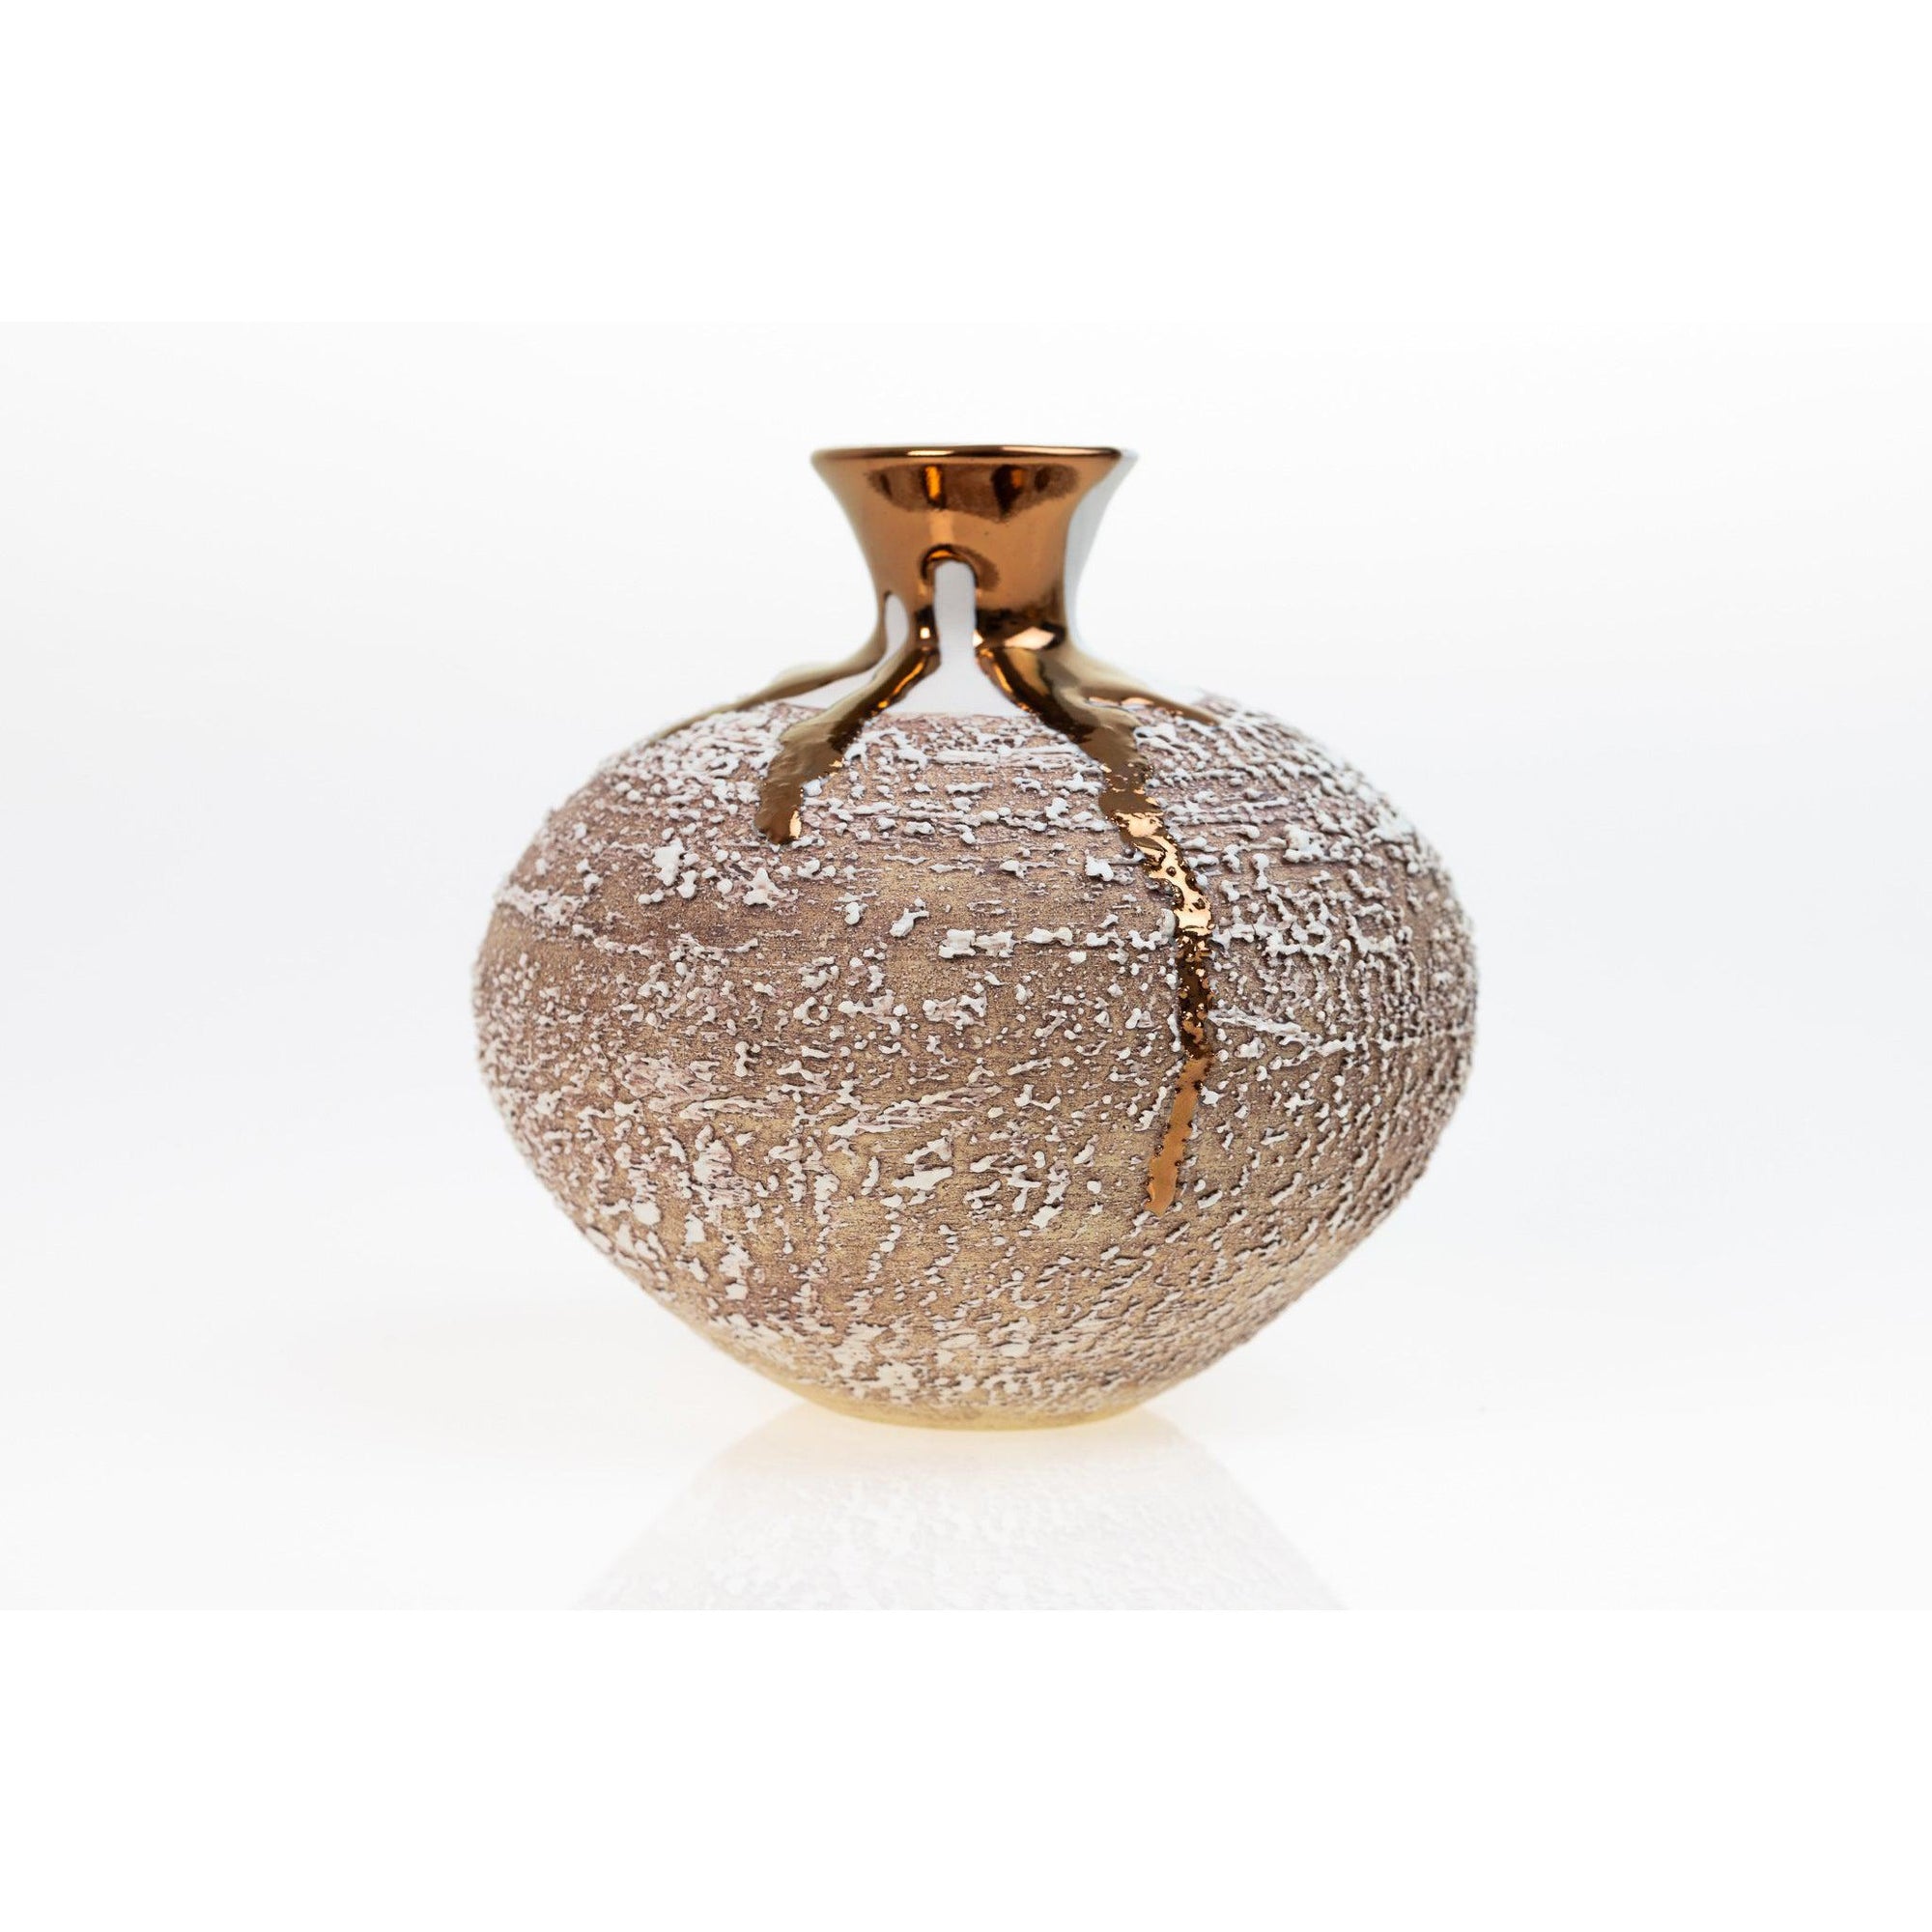 PGX29 Terra Textured Vase with Copper Lustre by Alex McCarthy, available at Padstow Gallery, Cornwall